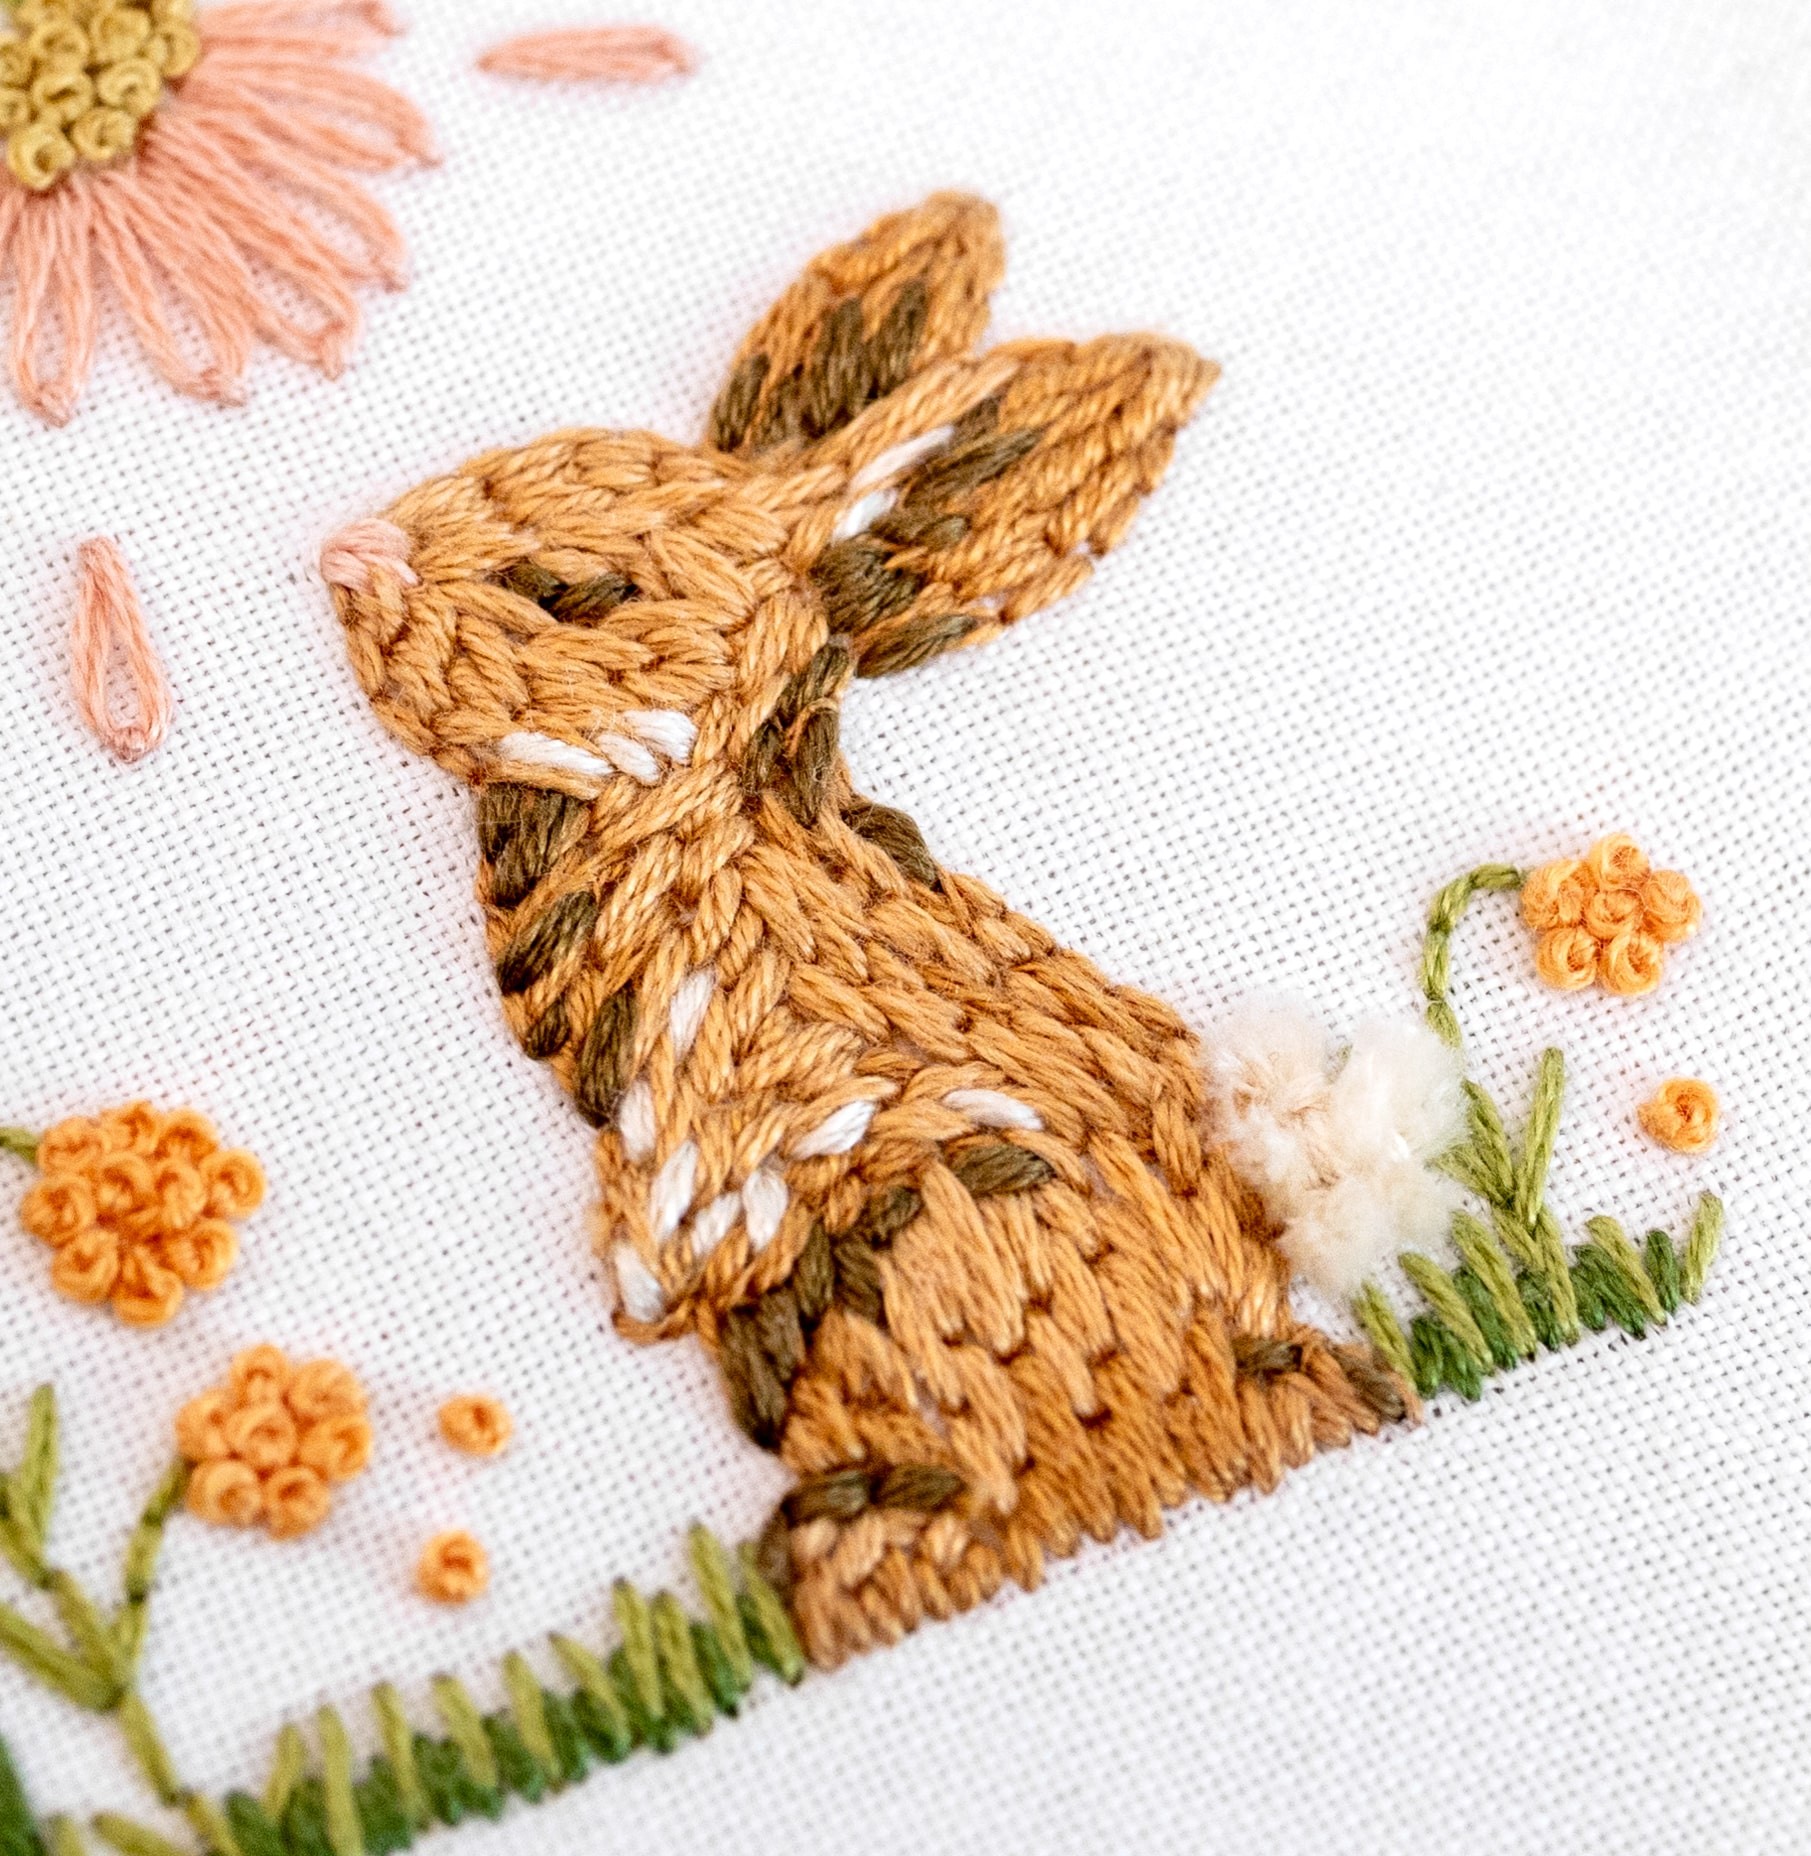 This is an image of a bunny from the modified Bunny Blooms Clever Poppy pattern stitched with Long and Short Stitch.